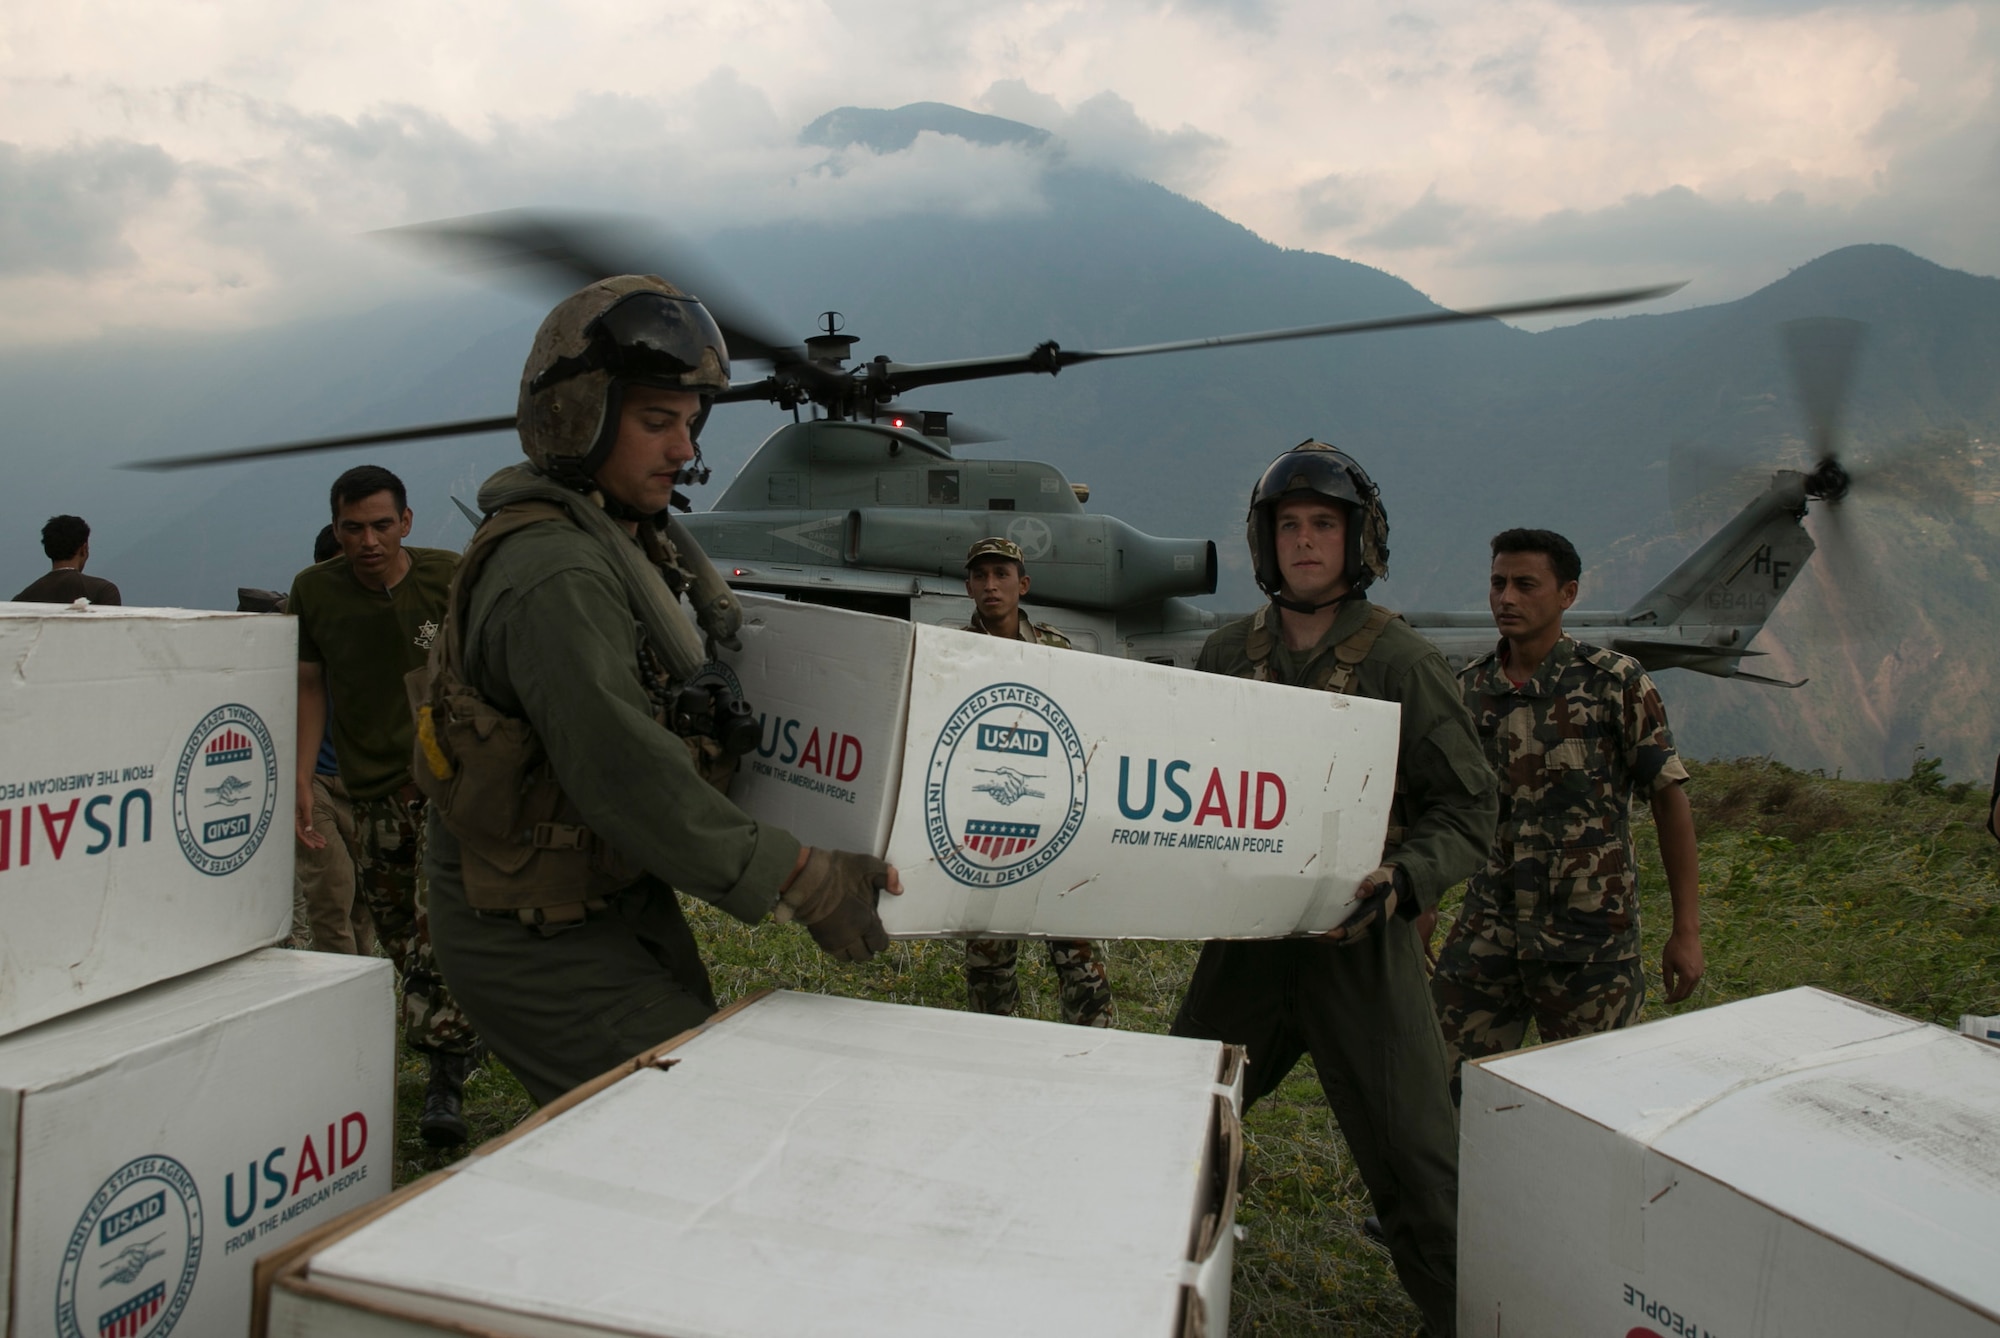 U.S. Marines and Nepalese soldiers unload tarps off of a UH-1Y Huey at Orang, Nepal, during Operation Sahayogi Haat, May 19, 2015. Joint Task Force 505 is drawing down its earthquake relief operations as the Nepalese government and international aid agencies have postured for long-term recovery and reconstruction efforts. Nepal announced its transition from relief operations to the recovery phase of disaster response May 19. (U.S. Marine Corps photo/Cpl. Isaac Ibarra) 